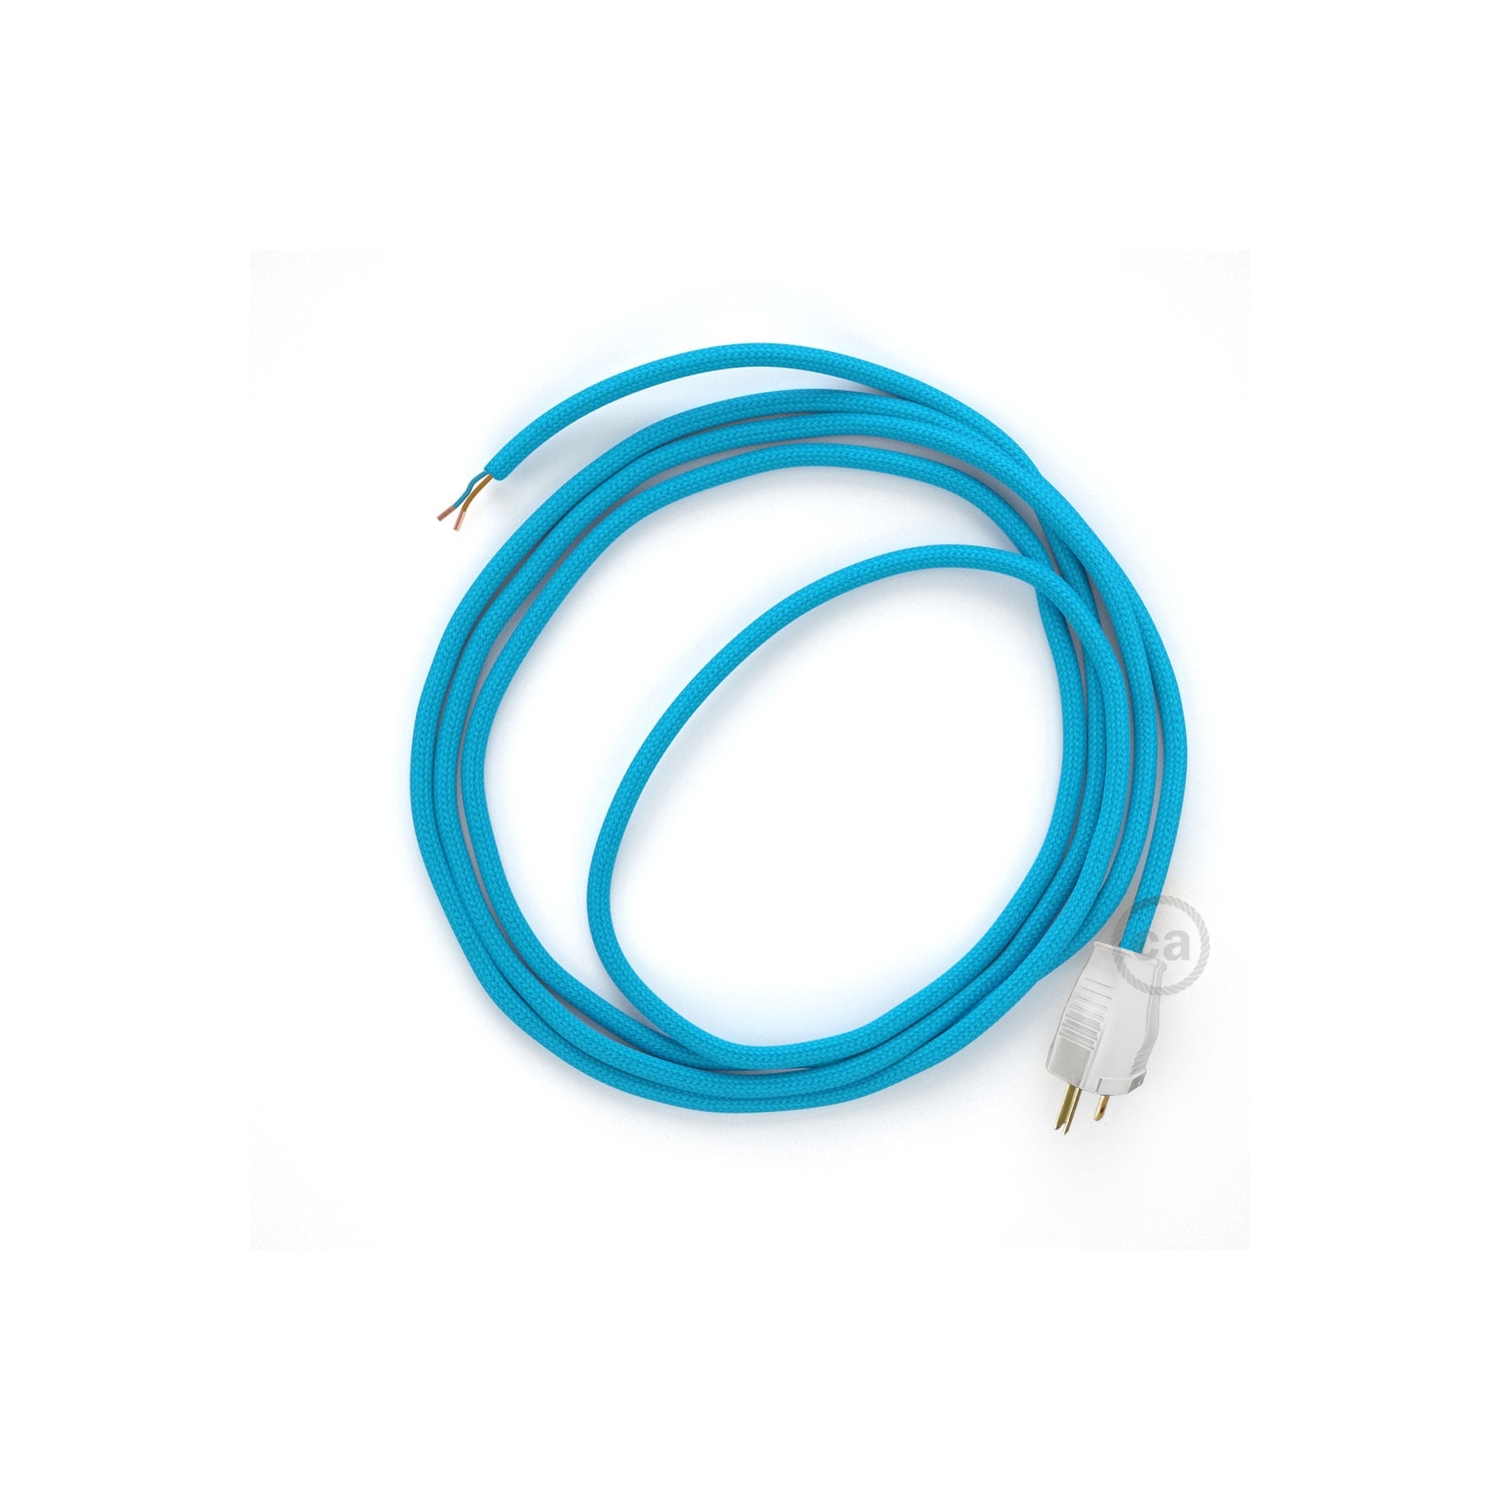 Cord-set - RM11 Light Blue Rayon Covered Round Cable